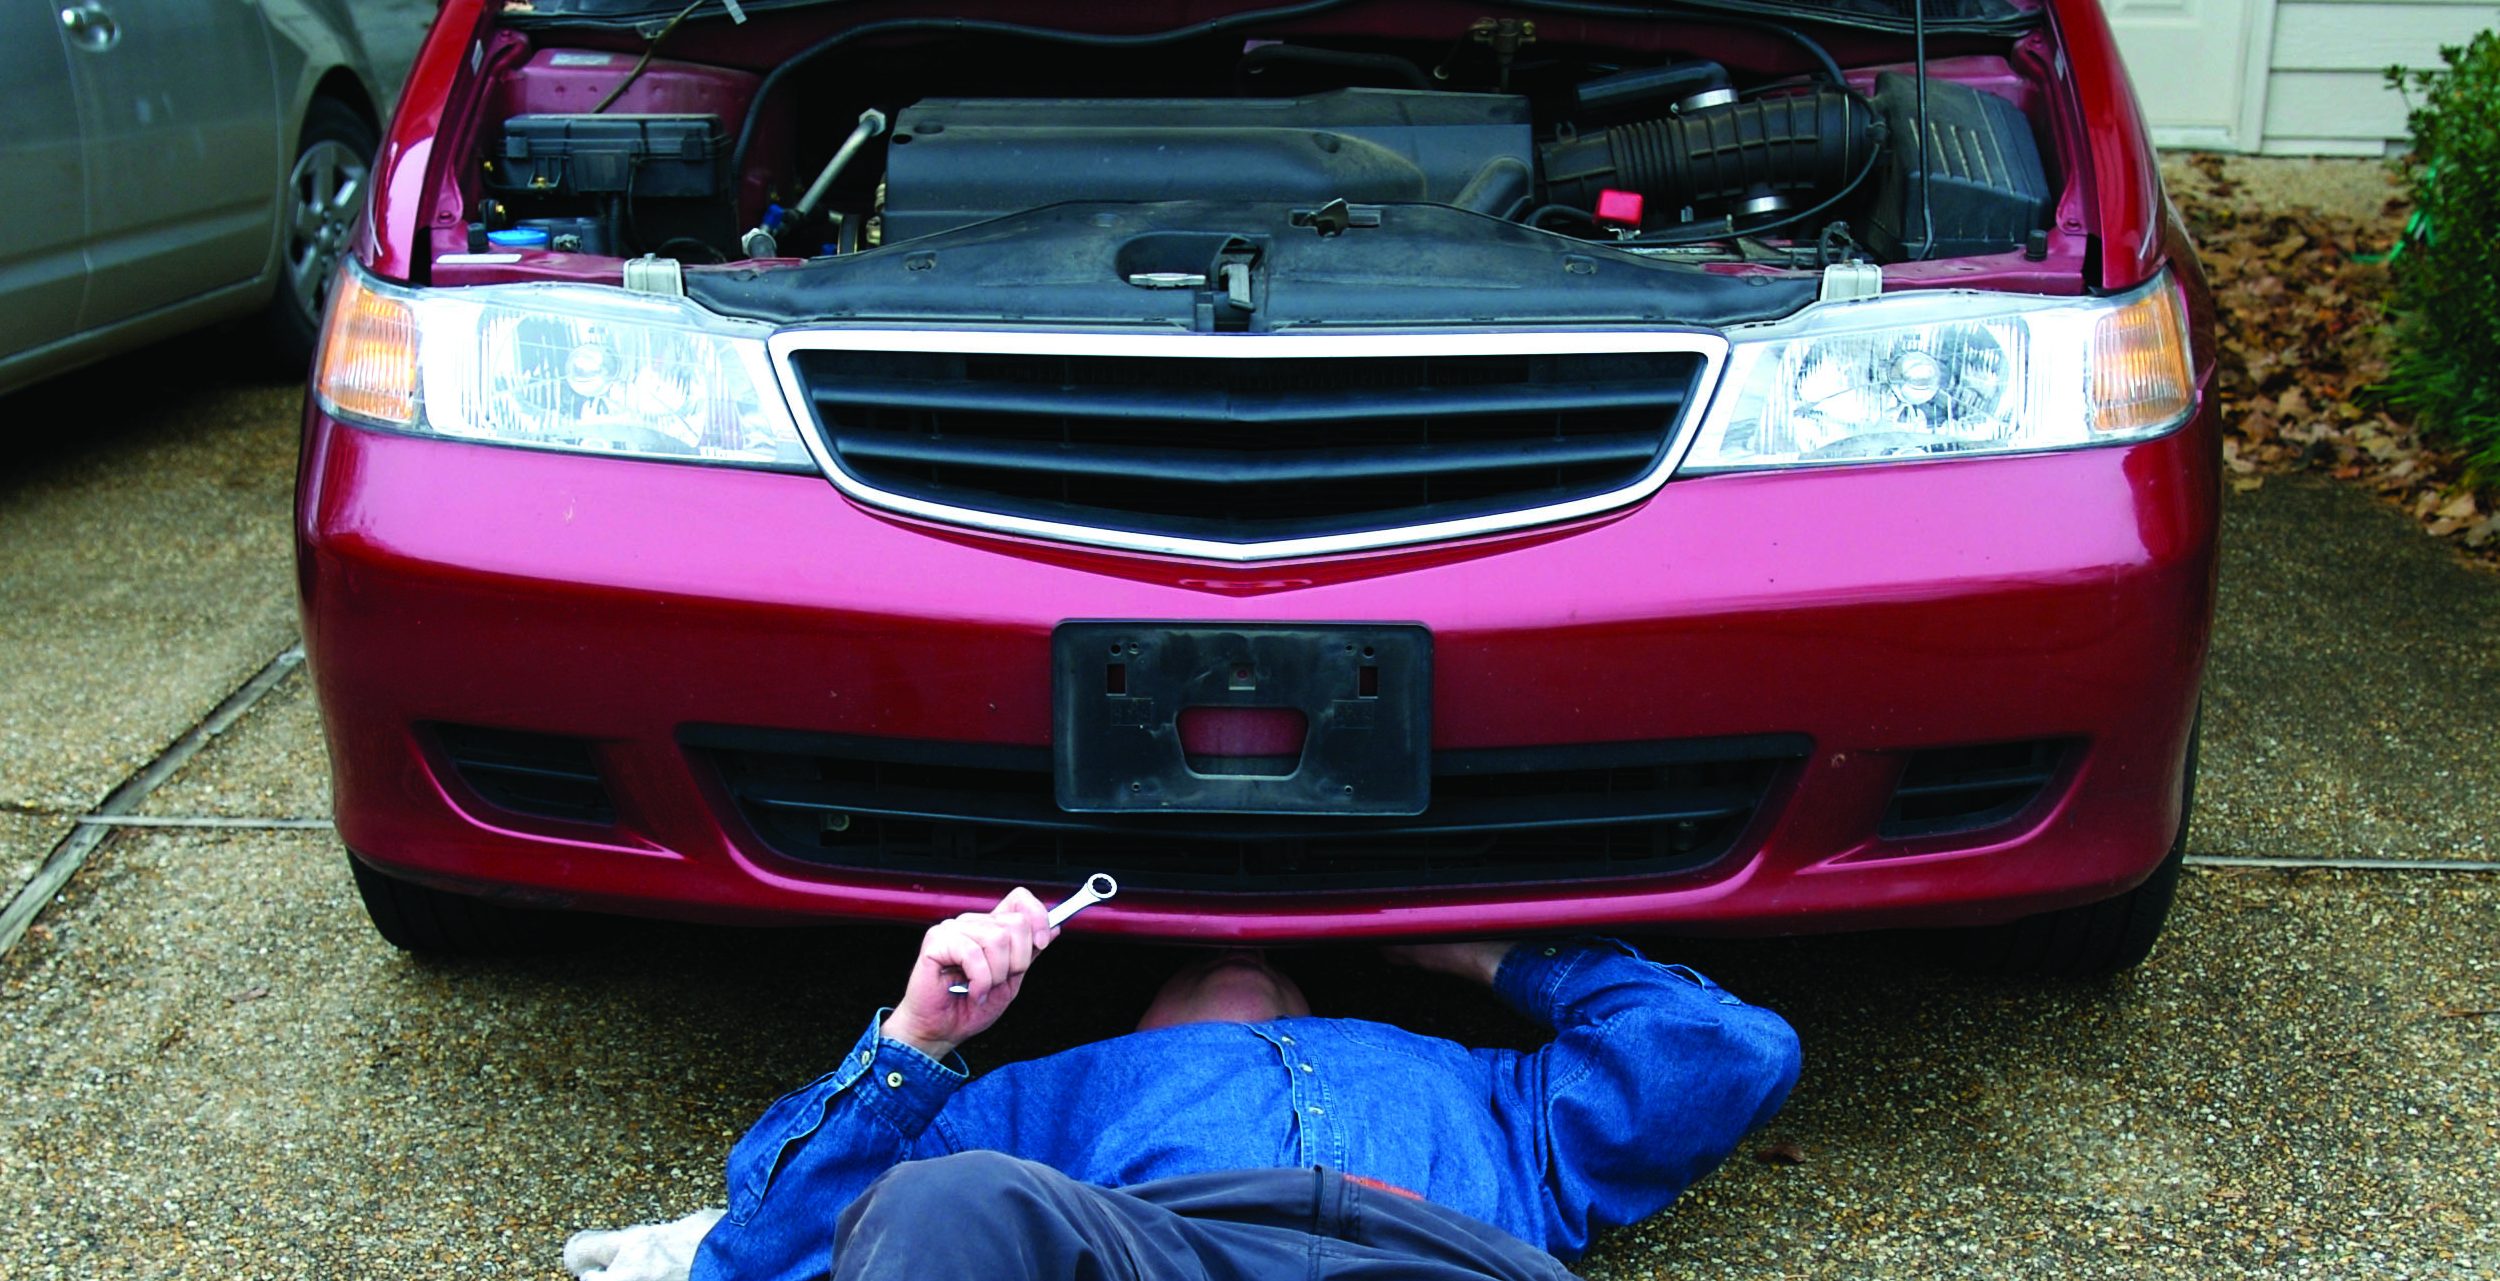 A DIY Auto Repair or a Job for an Expert? 5 Questions to Ask Before Doing It Yourself